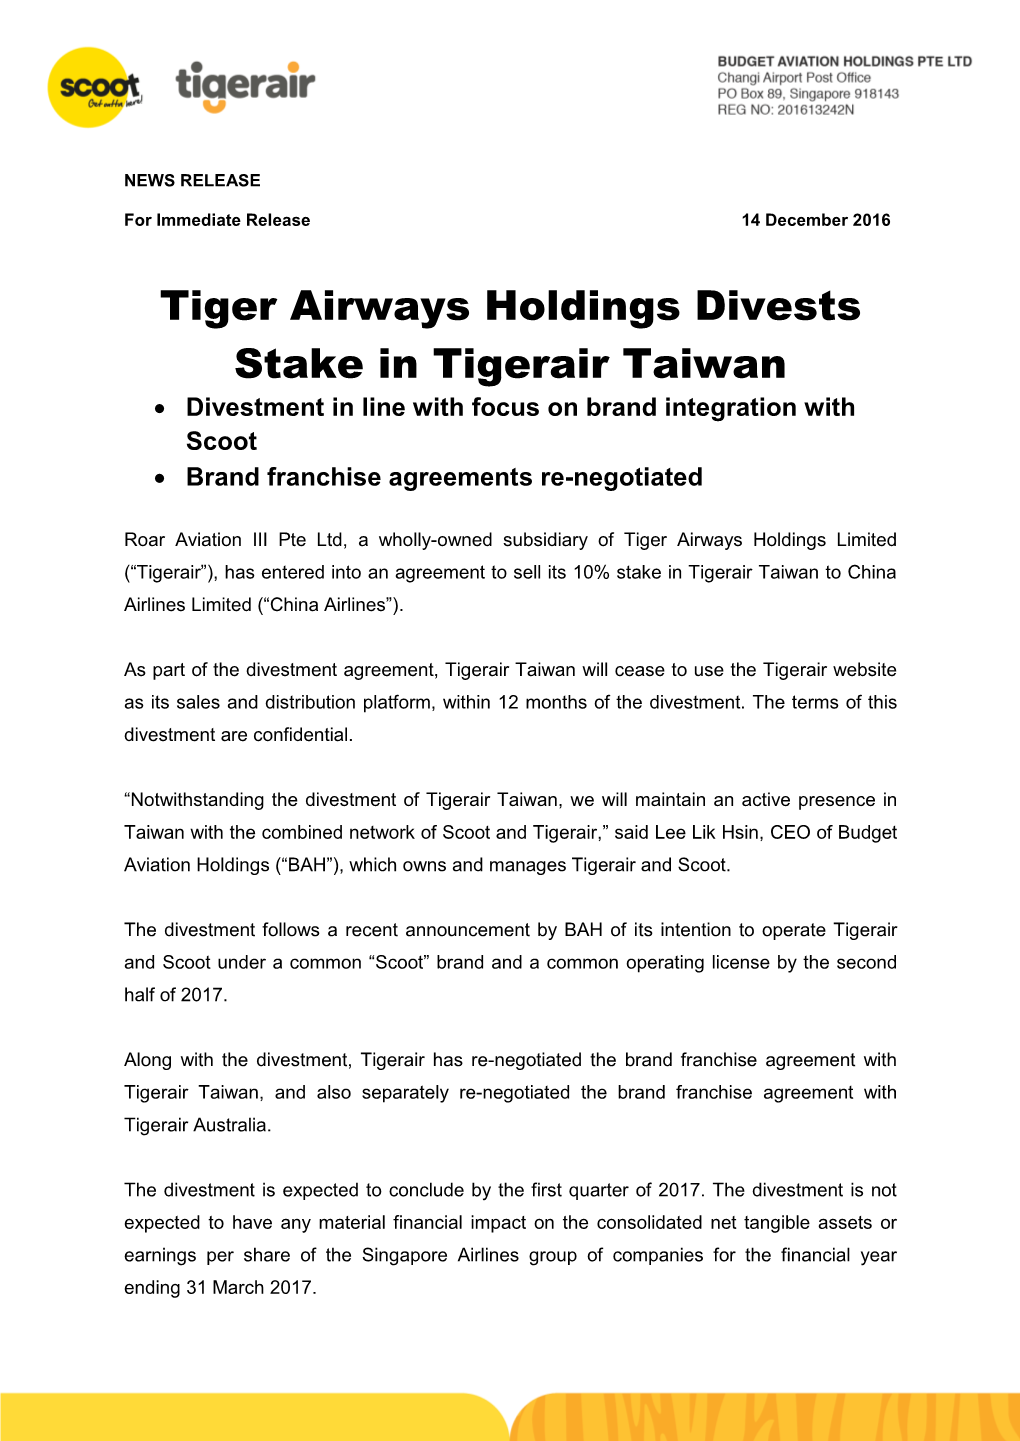 Tiger Airways Holdings Divests Stake in Tigerair Taiwan  Divestment in Line with Focus on Brand Integration with Scoot  Brand Franchise Agreements Re-Negotiated